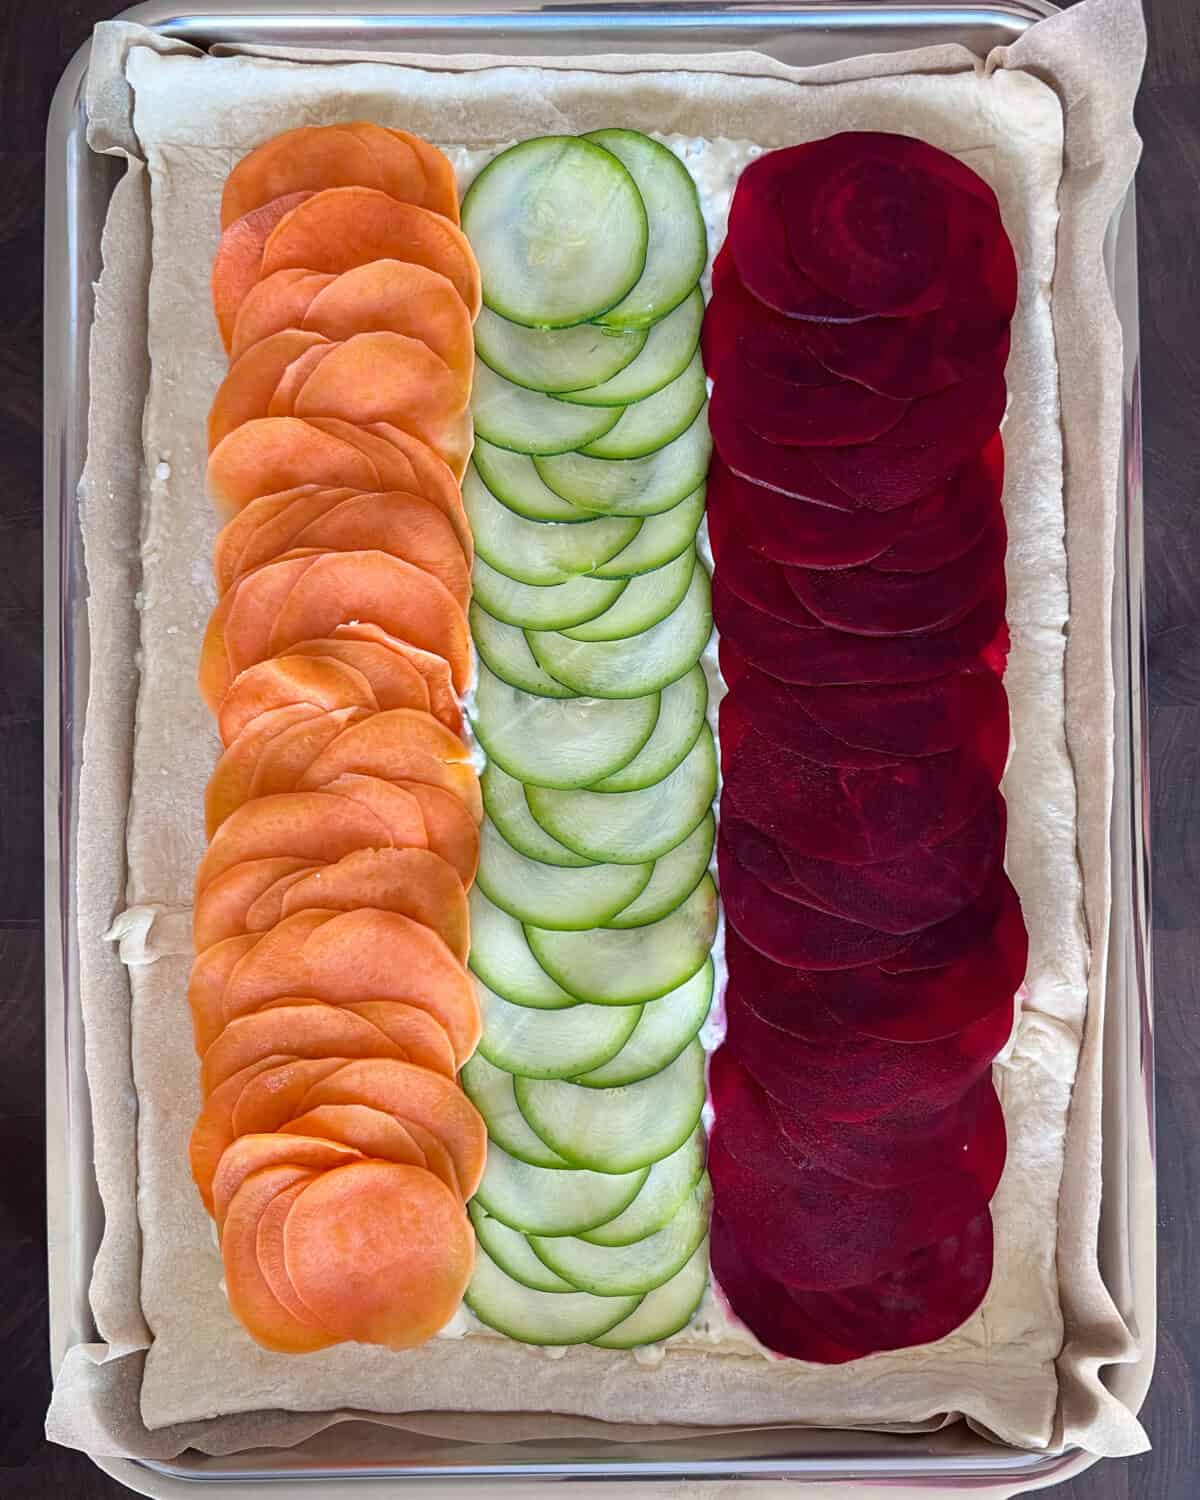 A row of zucchini, beets and sweet potatoes layered over the cheese layer on the puff pastry.